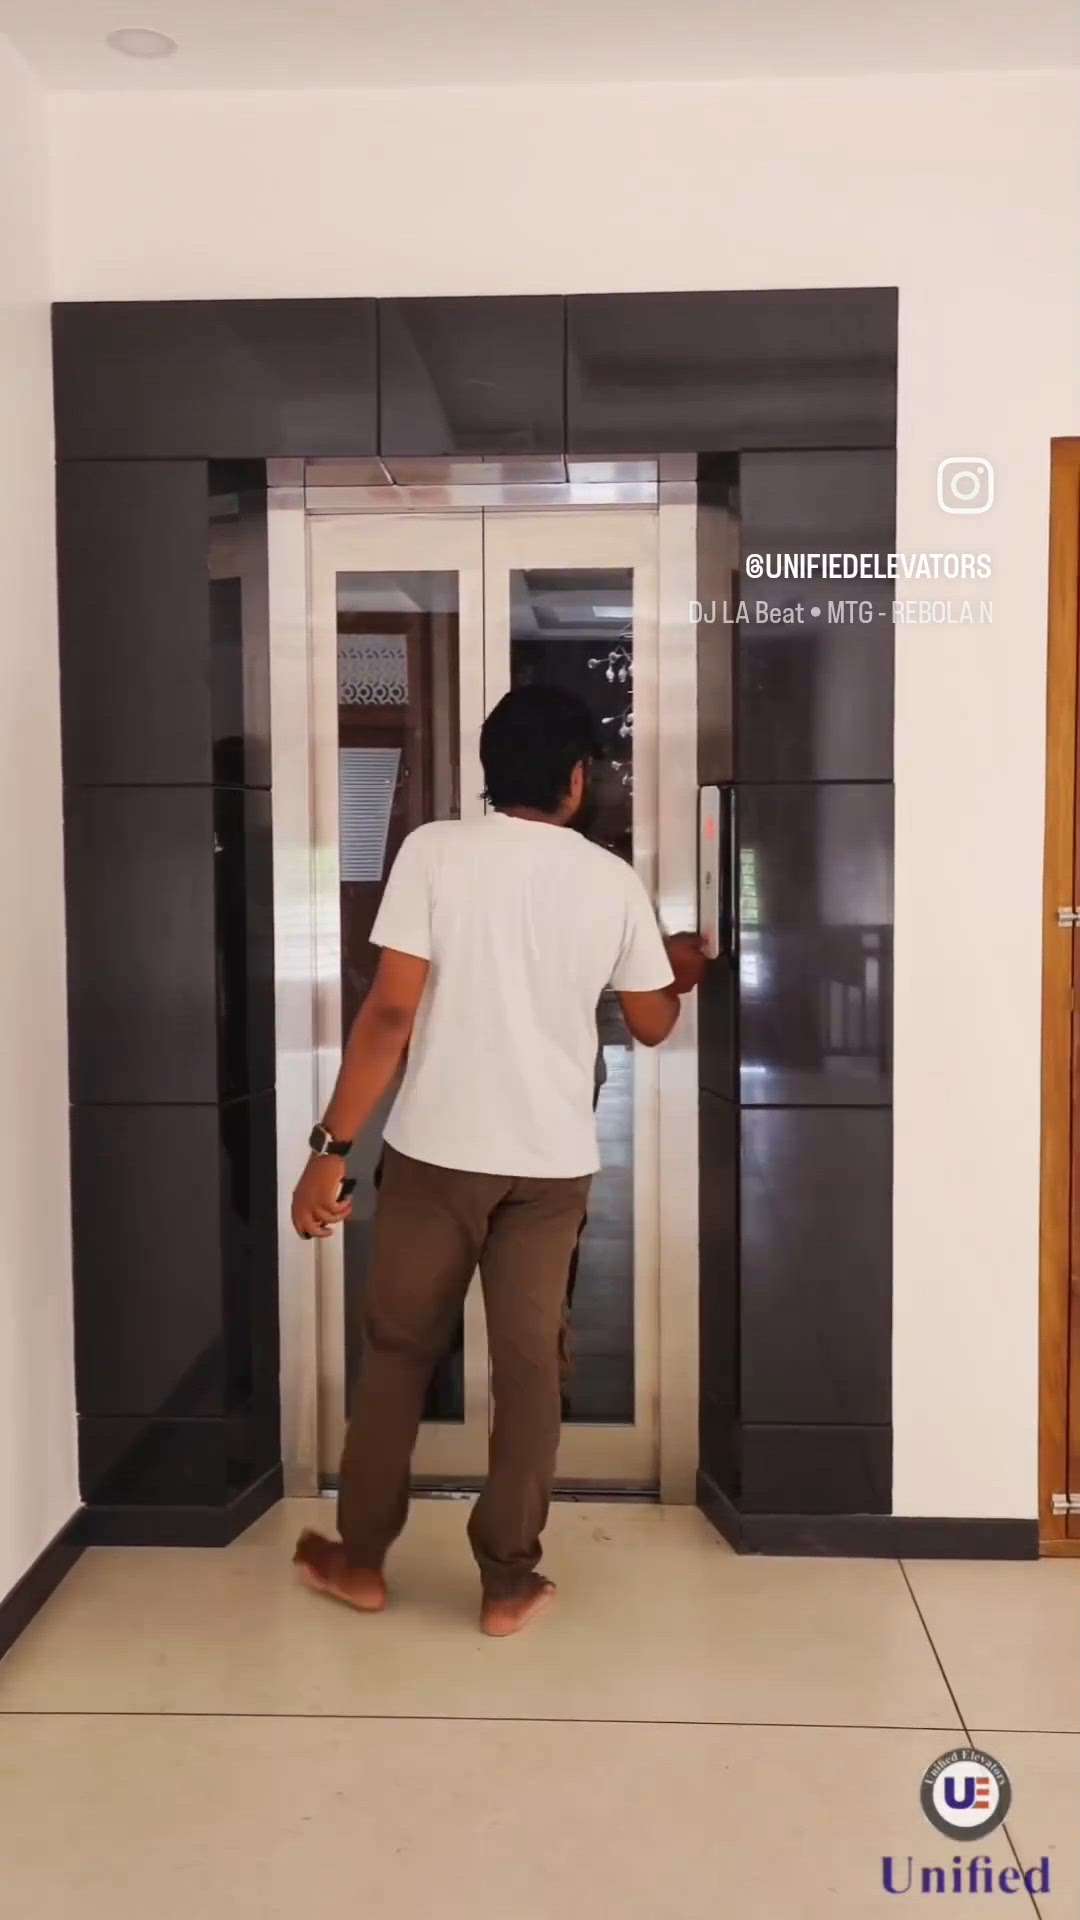 Home Elevators in Kerala | Rise  to the top floor of success; Choose unified elevators for your safe journey.

#Homeelevators #Elevators #HomeelevatorsinKerala #Bestelevators #ElevatorsinKerala #MakeinIndia #bestelevatorsinKerala

———————————
🌐 www.unifiedelevators.in
———————————

Our products :

Home Elevators
Hospital Elevators
Capsule Elevators
Glass Elevators
Small Elevators
Passenger Elevators
Hydraulic Elevators
———————————
Kerala | Bengalore | Chennai